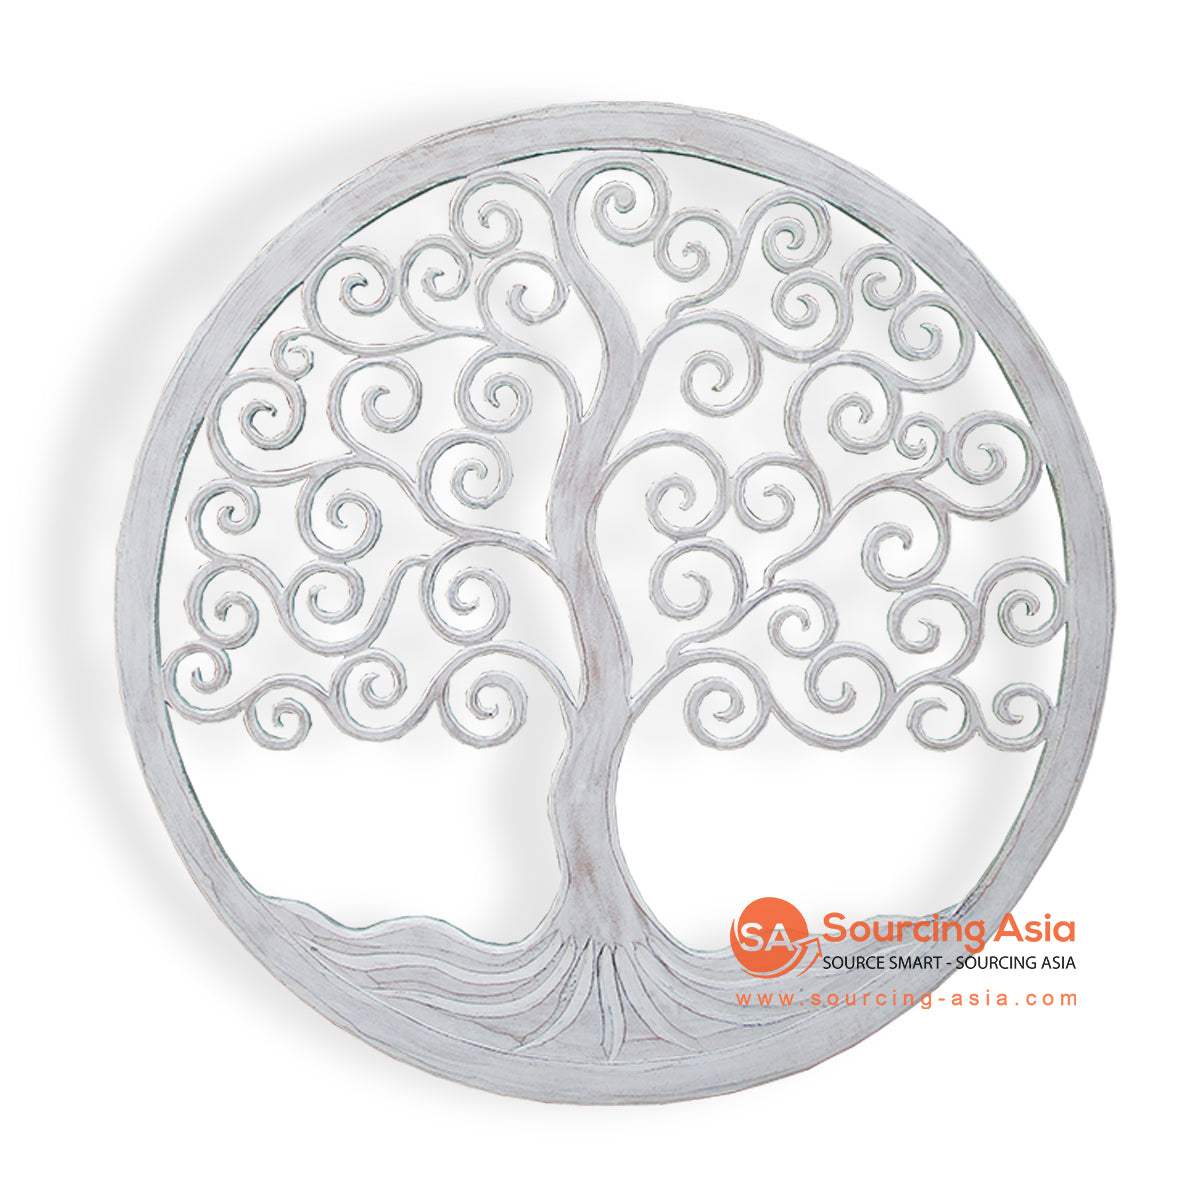 LUH013-100 WHITE WASH WOODEN ROUND "TREE OF LIFE" PANEL